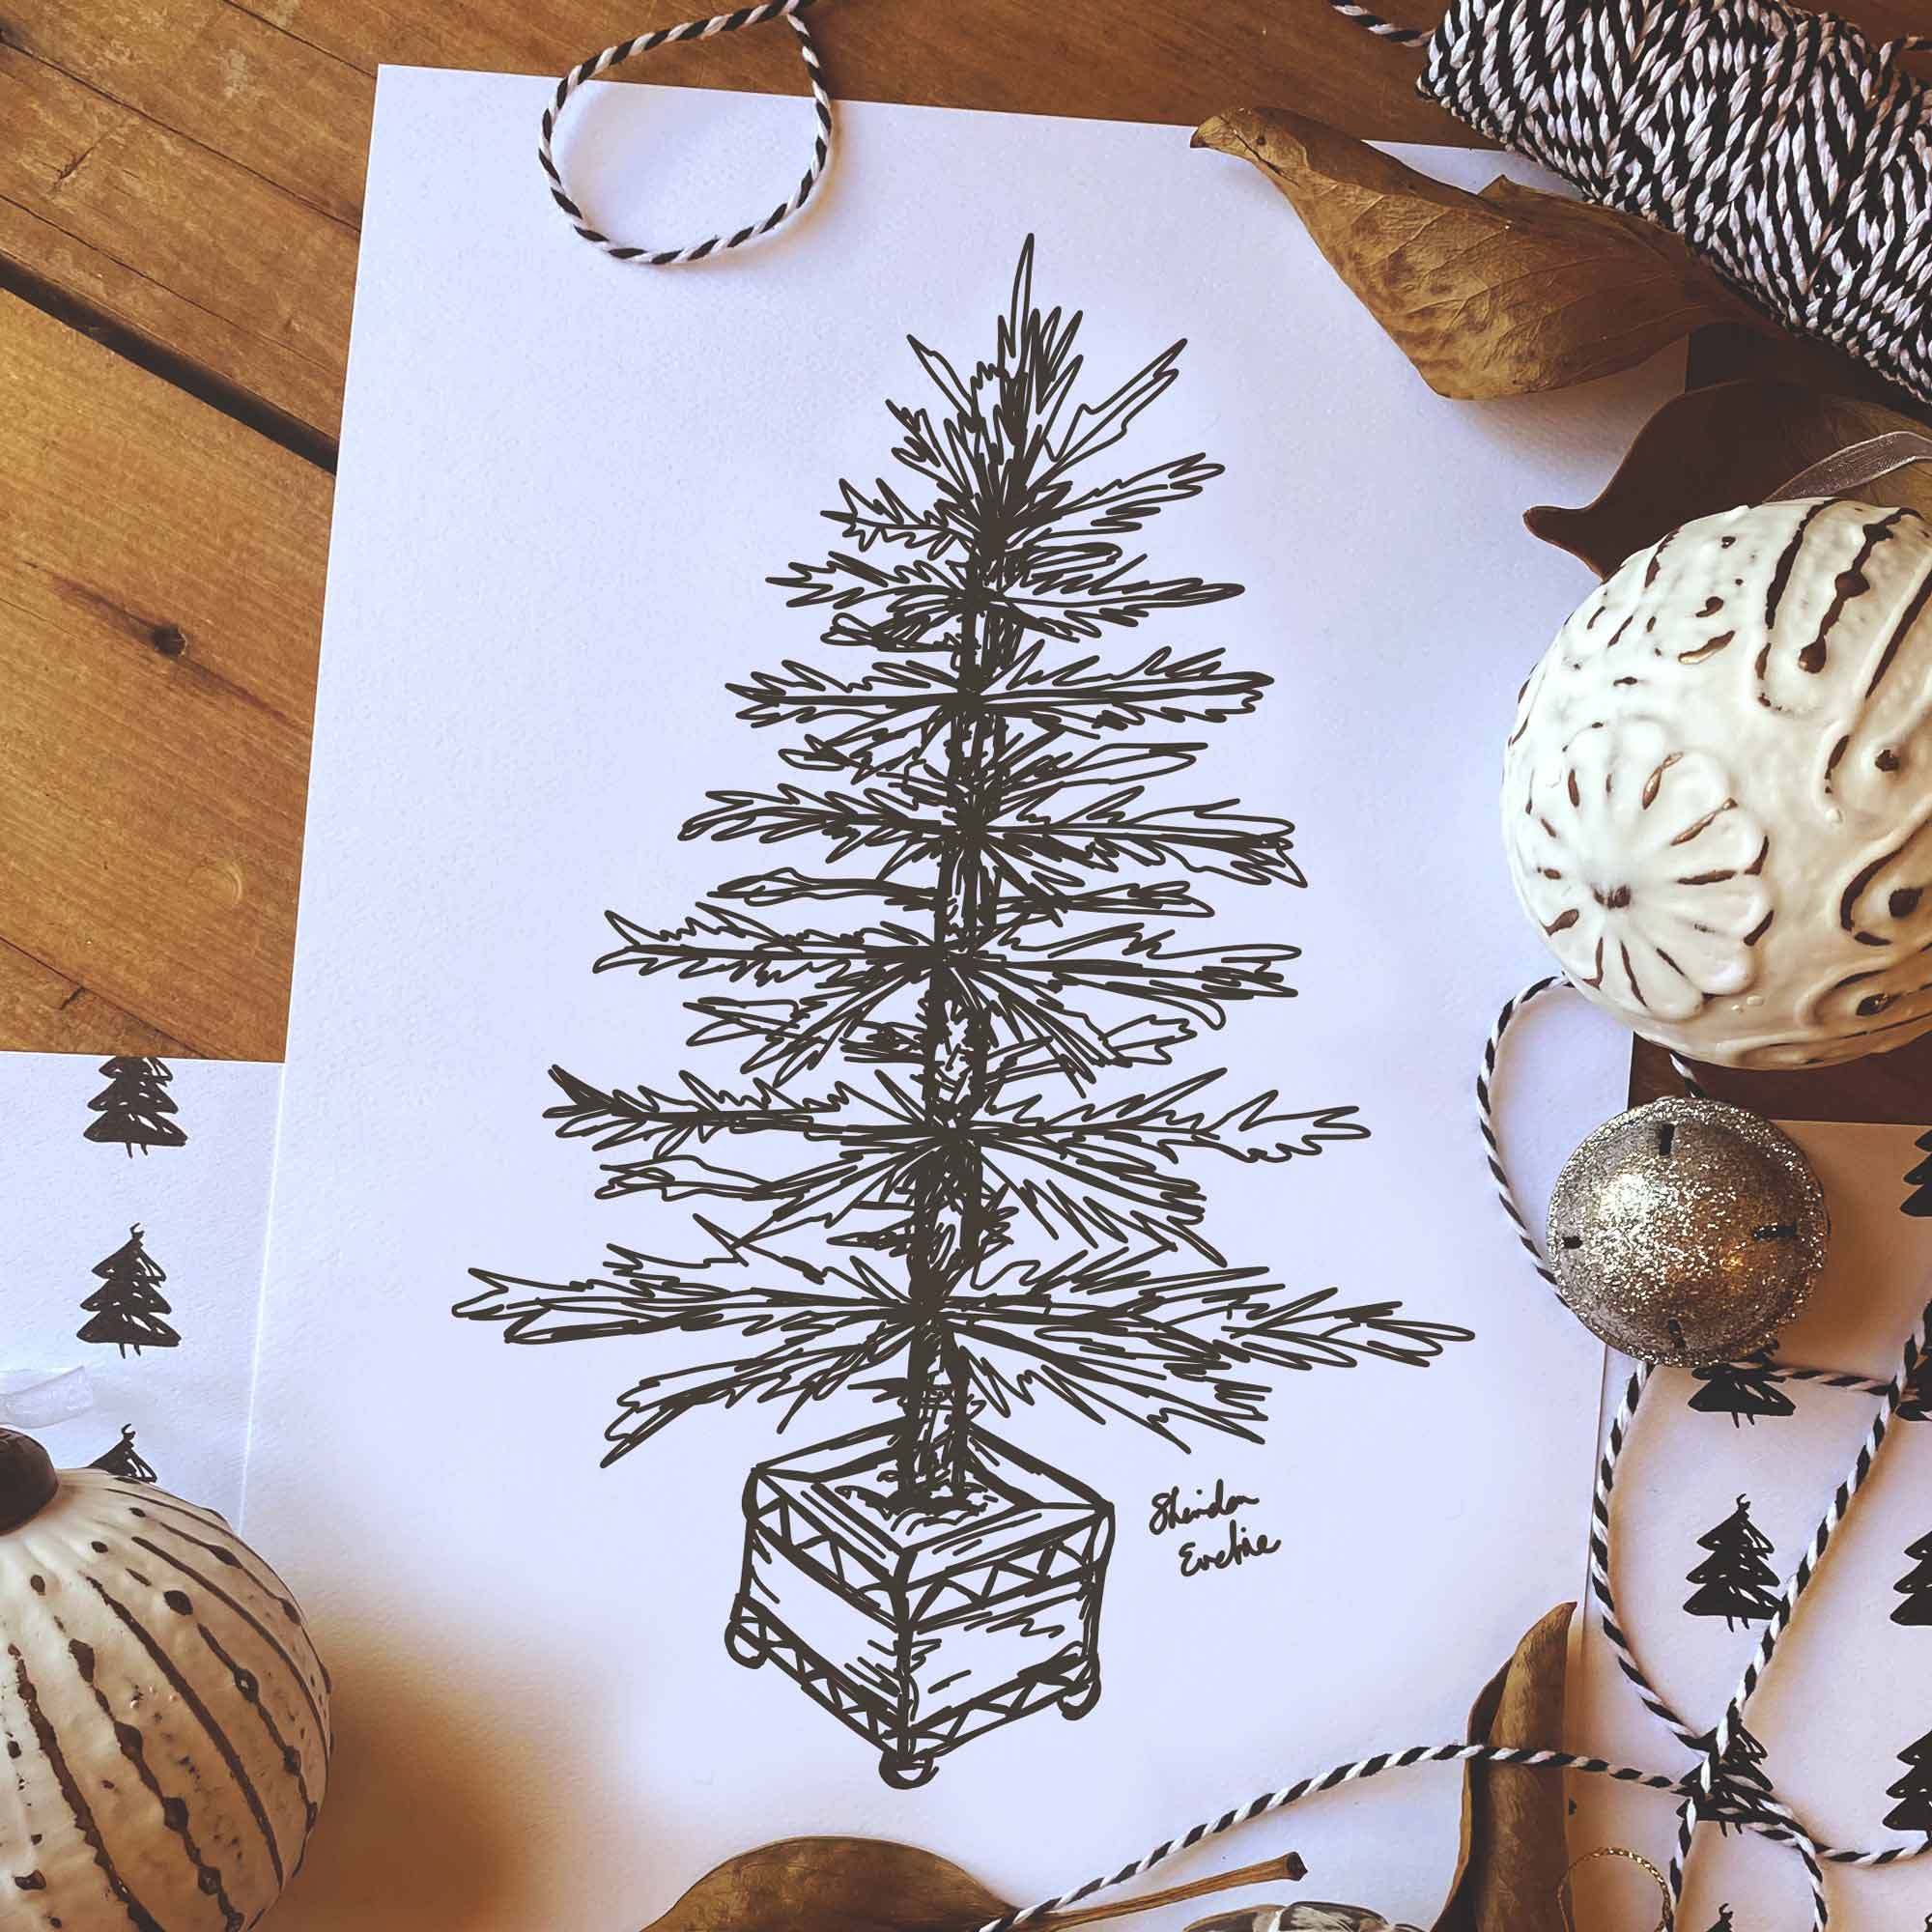 Children's drawing with decorated Christmas tree and presents stock photo